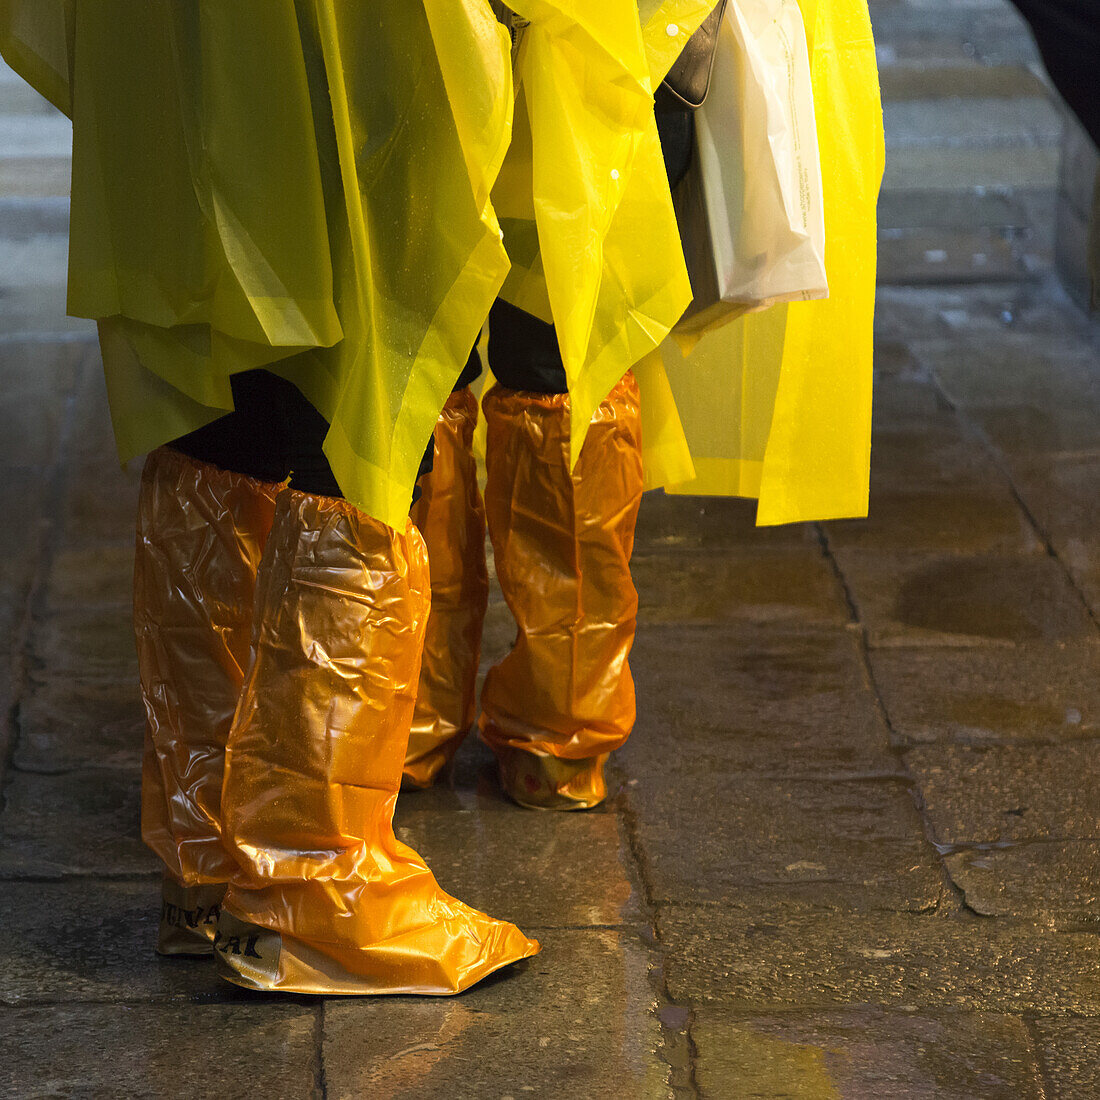 People Standing With Yellow Rain Ponchos And Footwear Covered In Orange Plastic Covers; Venice, Italy